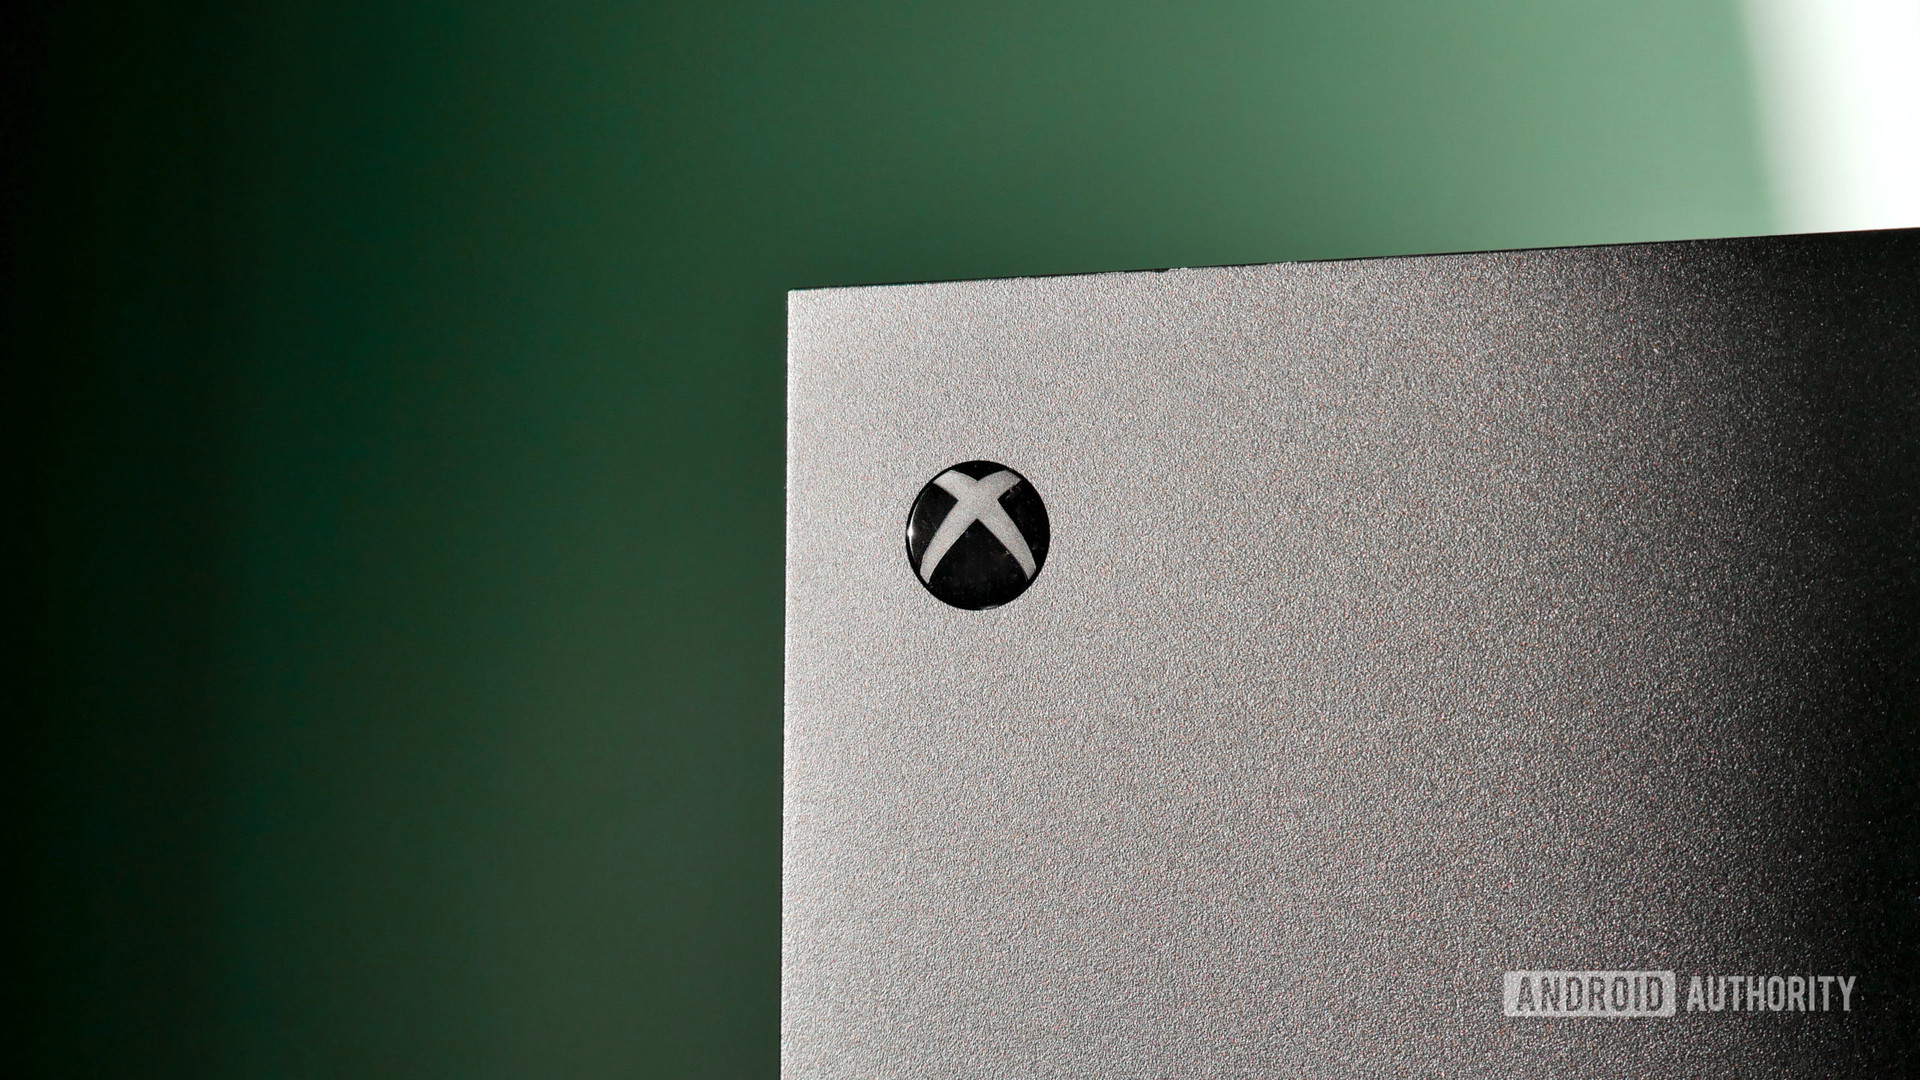 10 Apps to Download Onto Your Xbox Series X